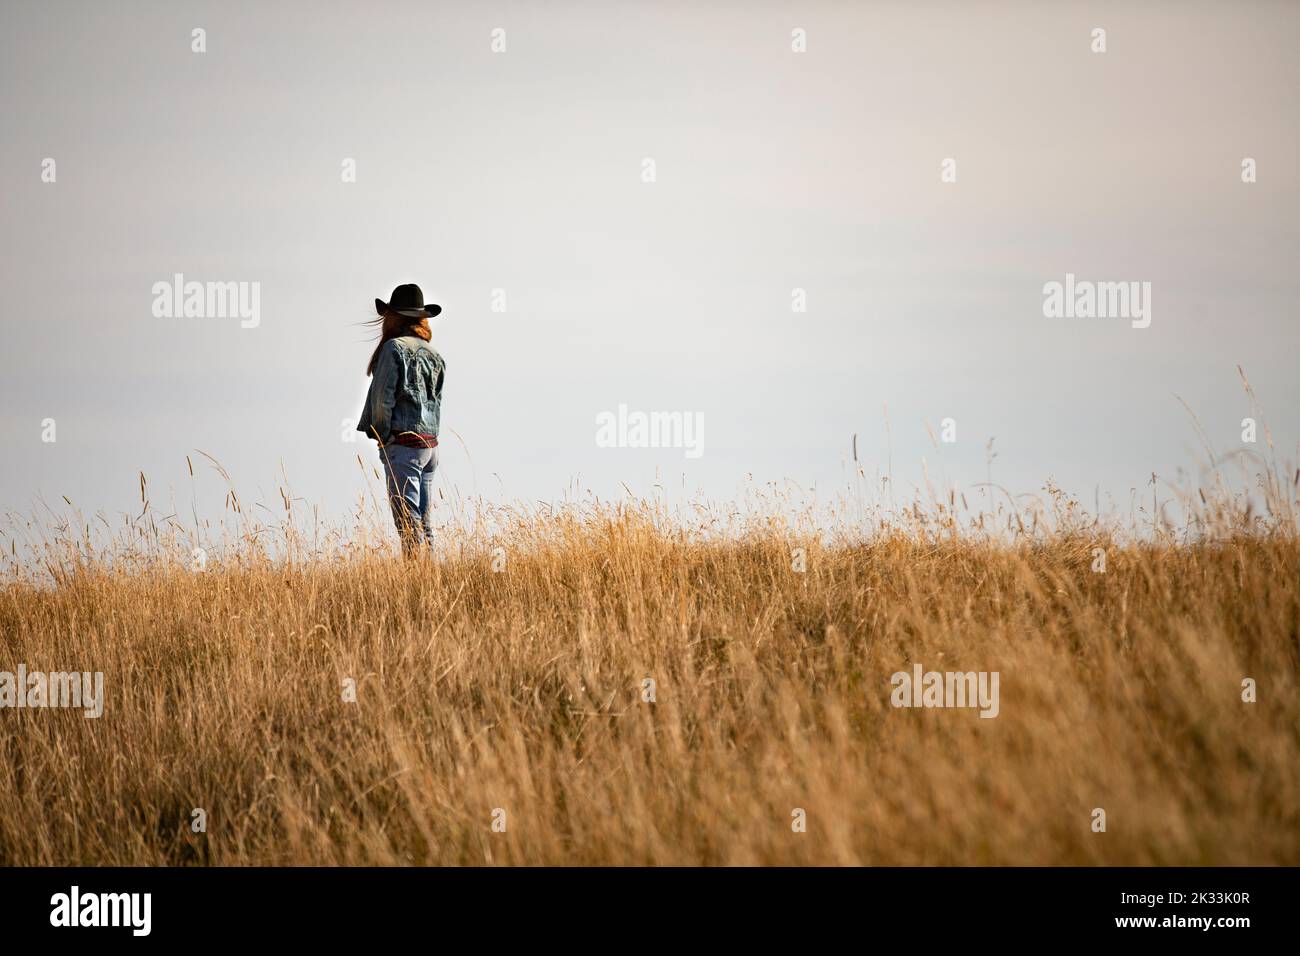 Rear view of cowgirl on wild grass field Stock Photo